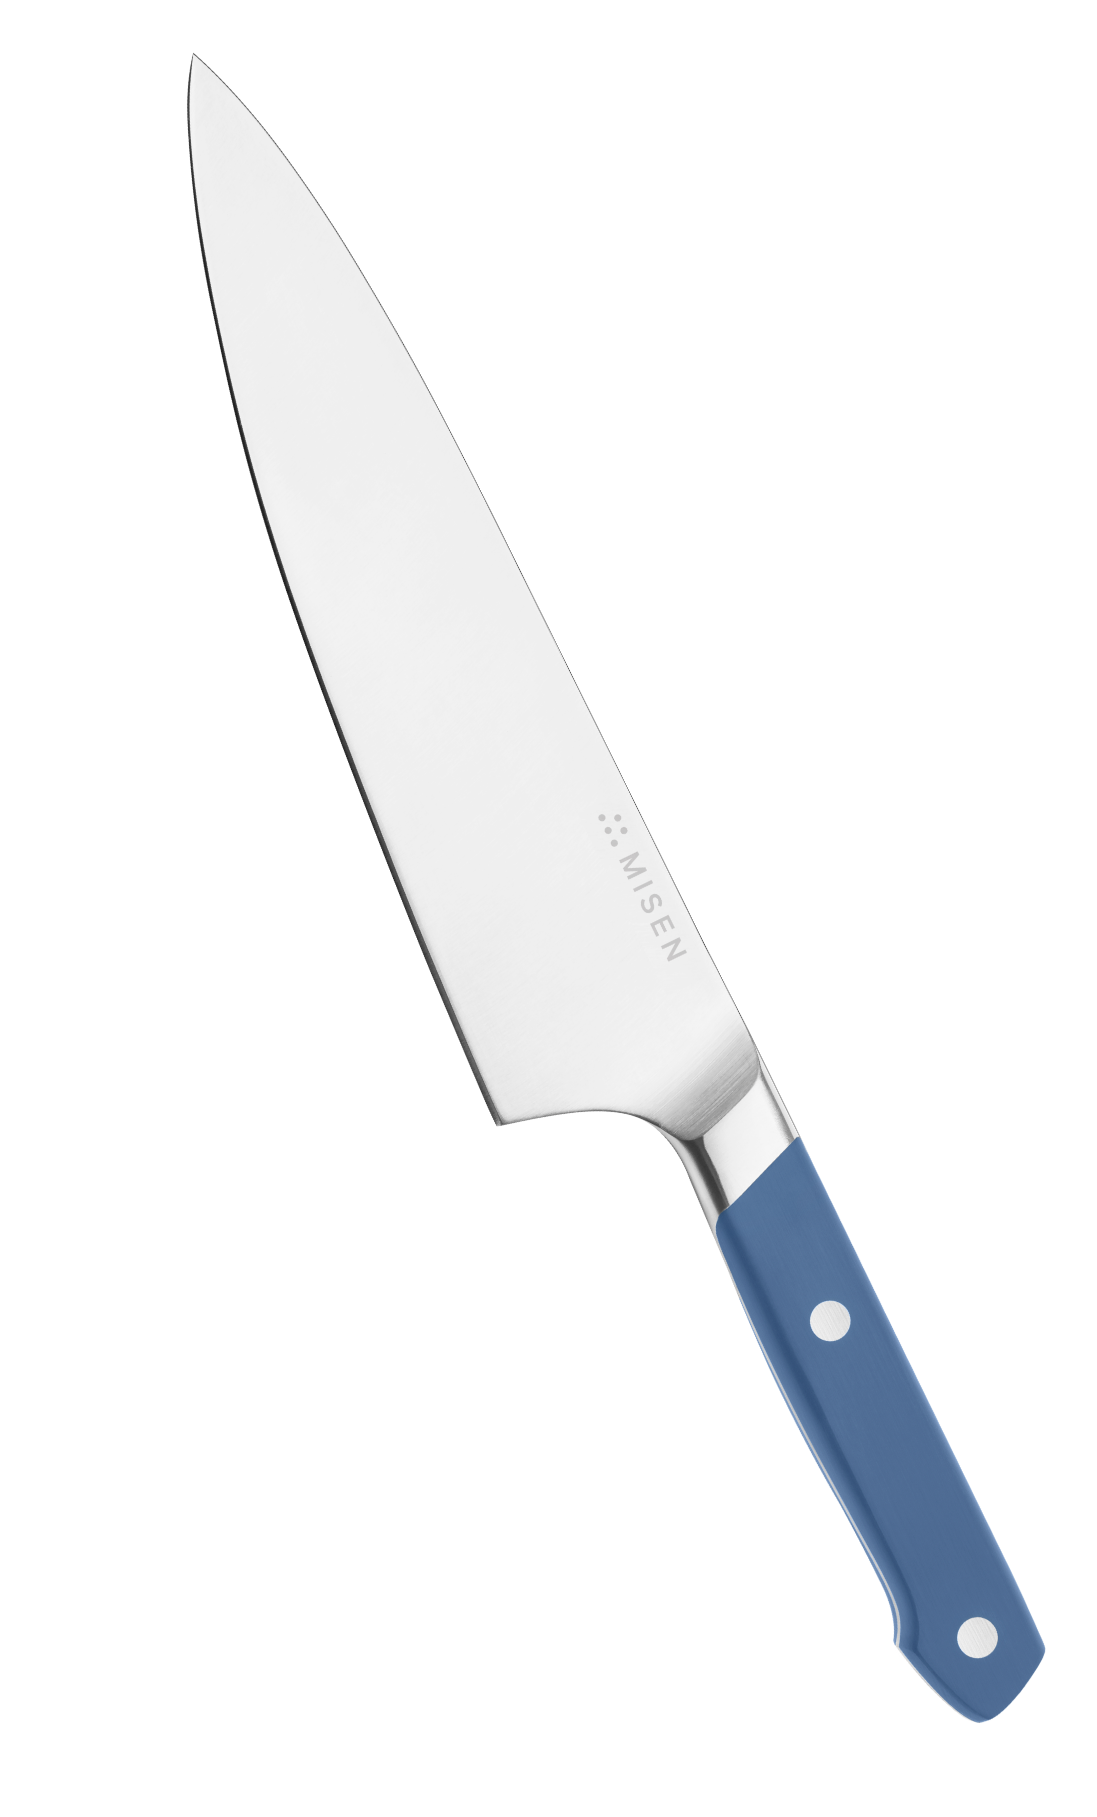 Shop now with your special discount for the Misen Short Chef's Knife!